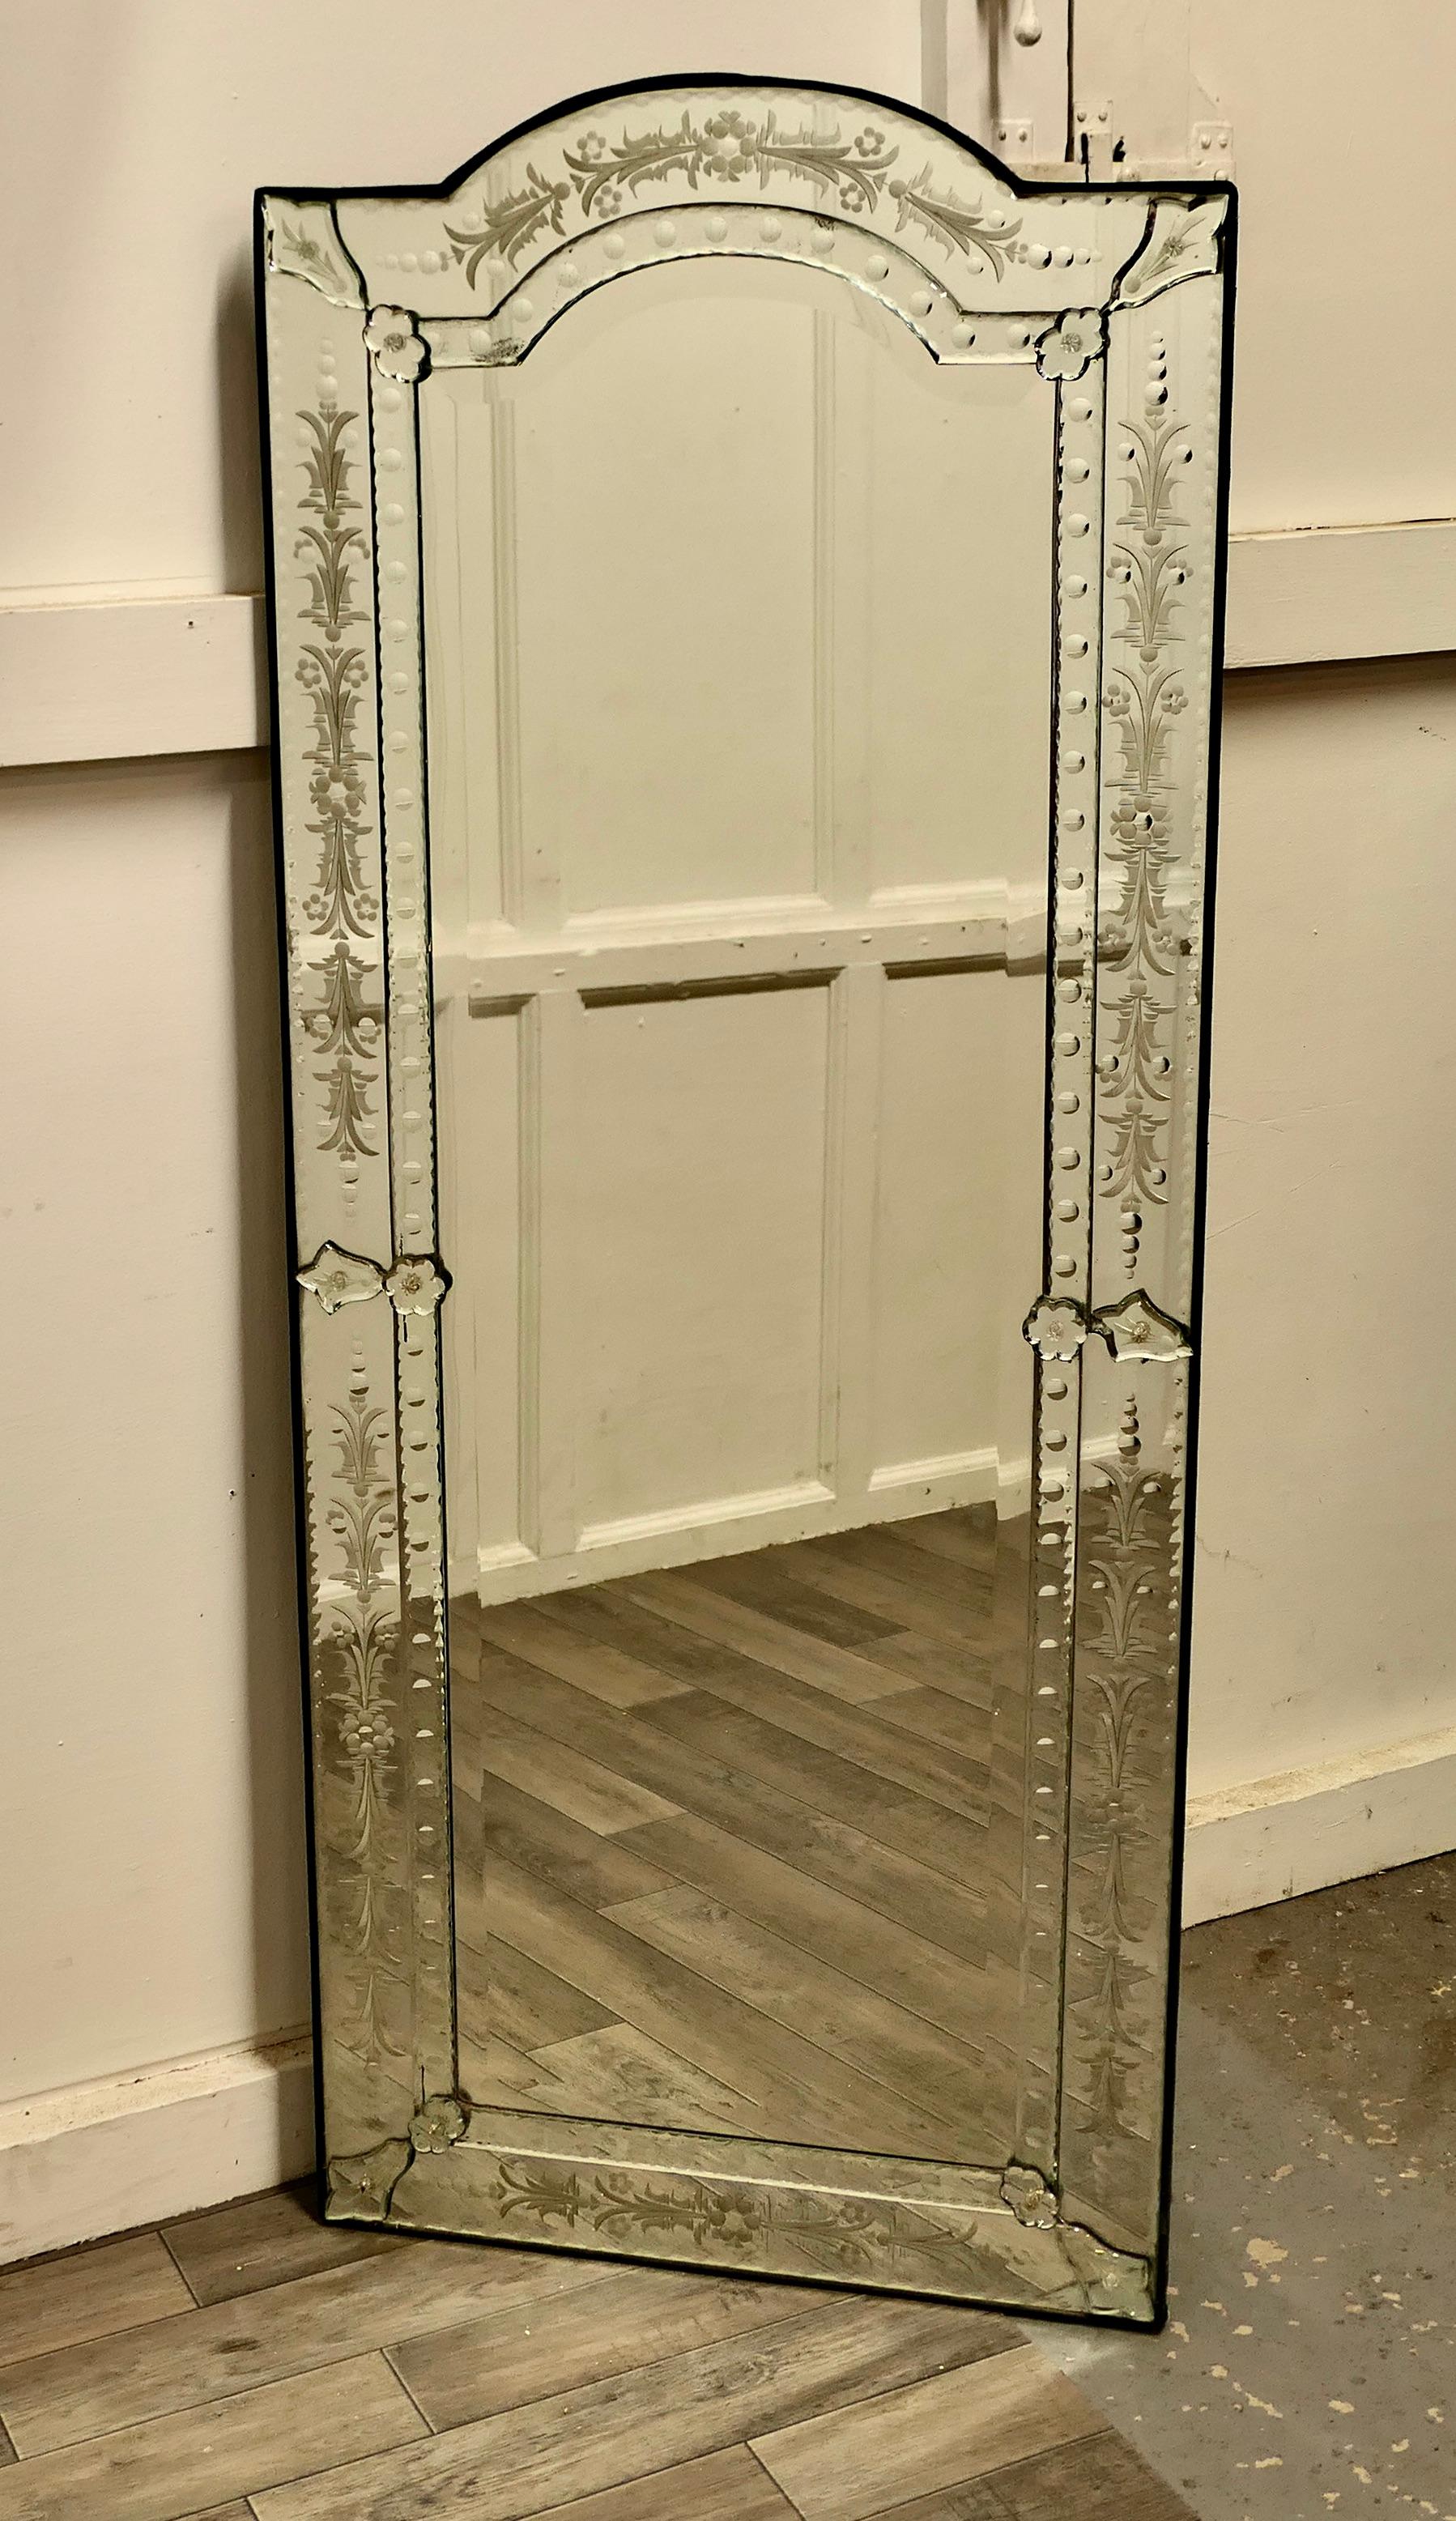 Superb large venetian pier mirror.

This is the most outstanding piece, there are no repairs or damage, the mirror is full length with a slightly arched top and a reverse etched floral decorated theme all round on the 3” wide border.
The mirror